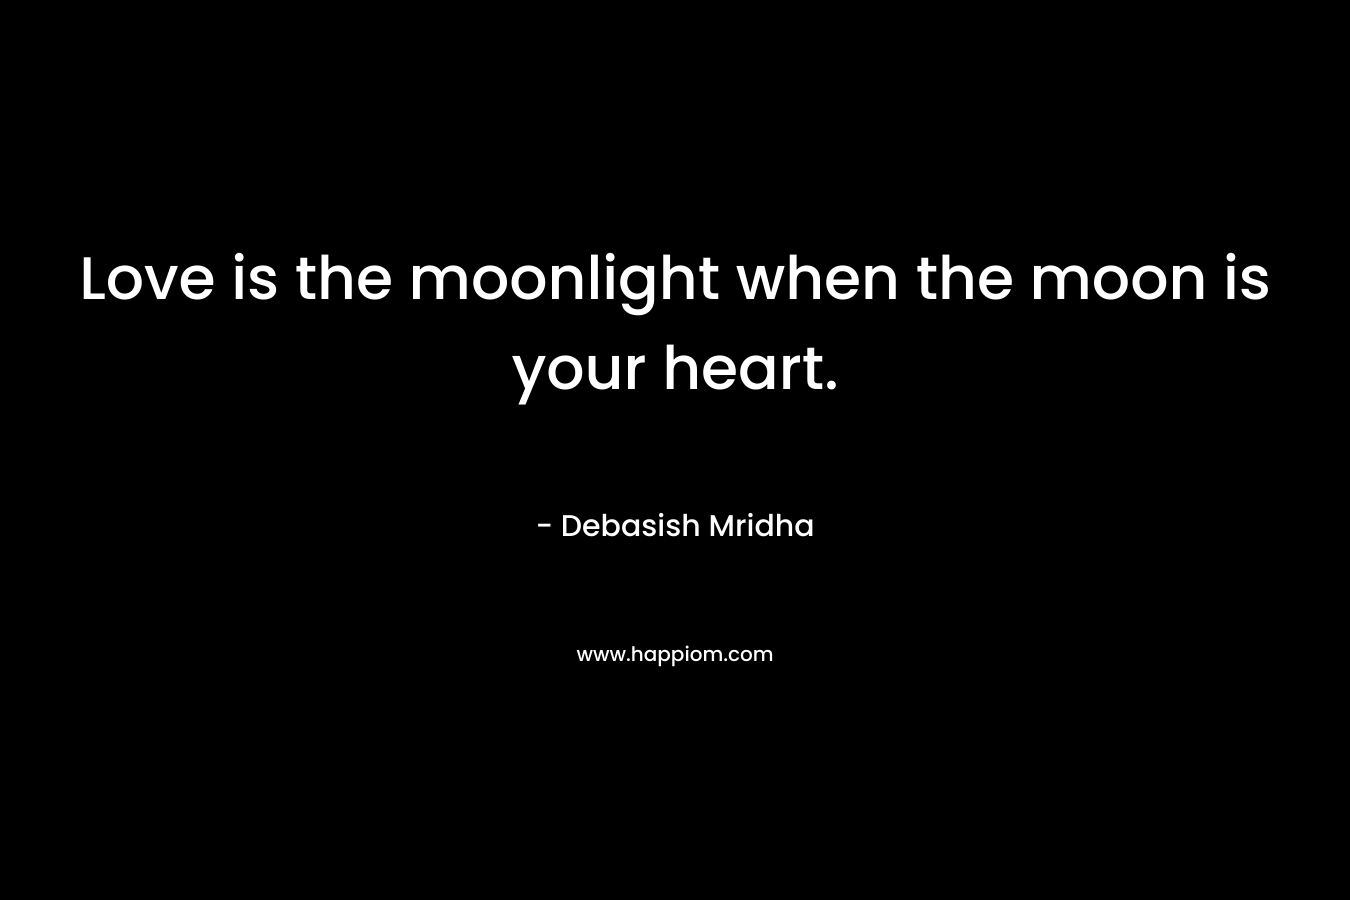 Love is the moonlight when the moon is your heart.